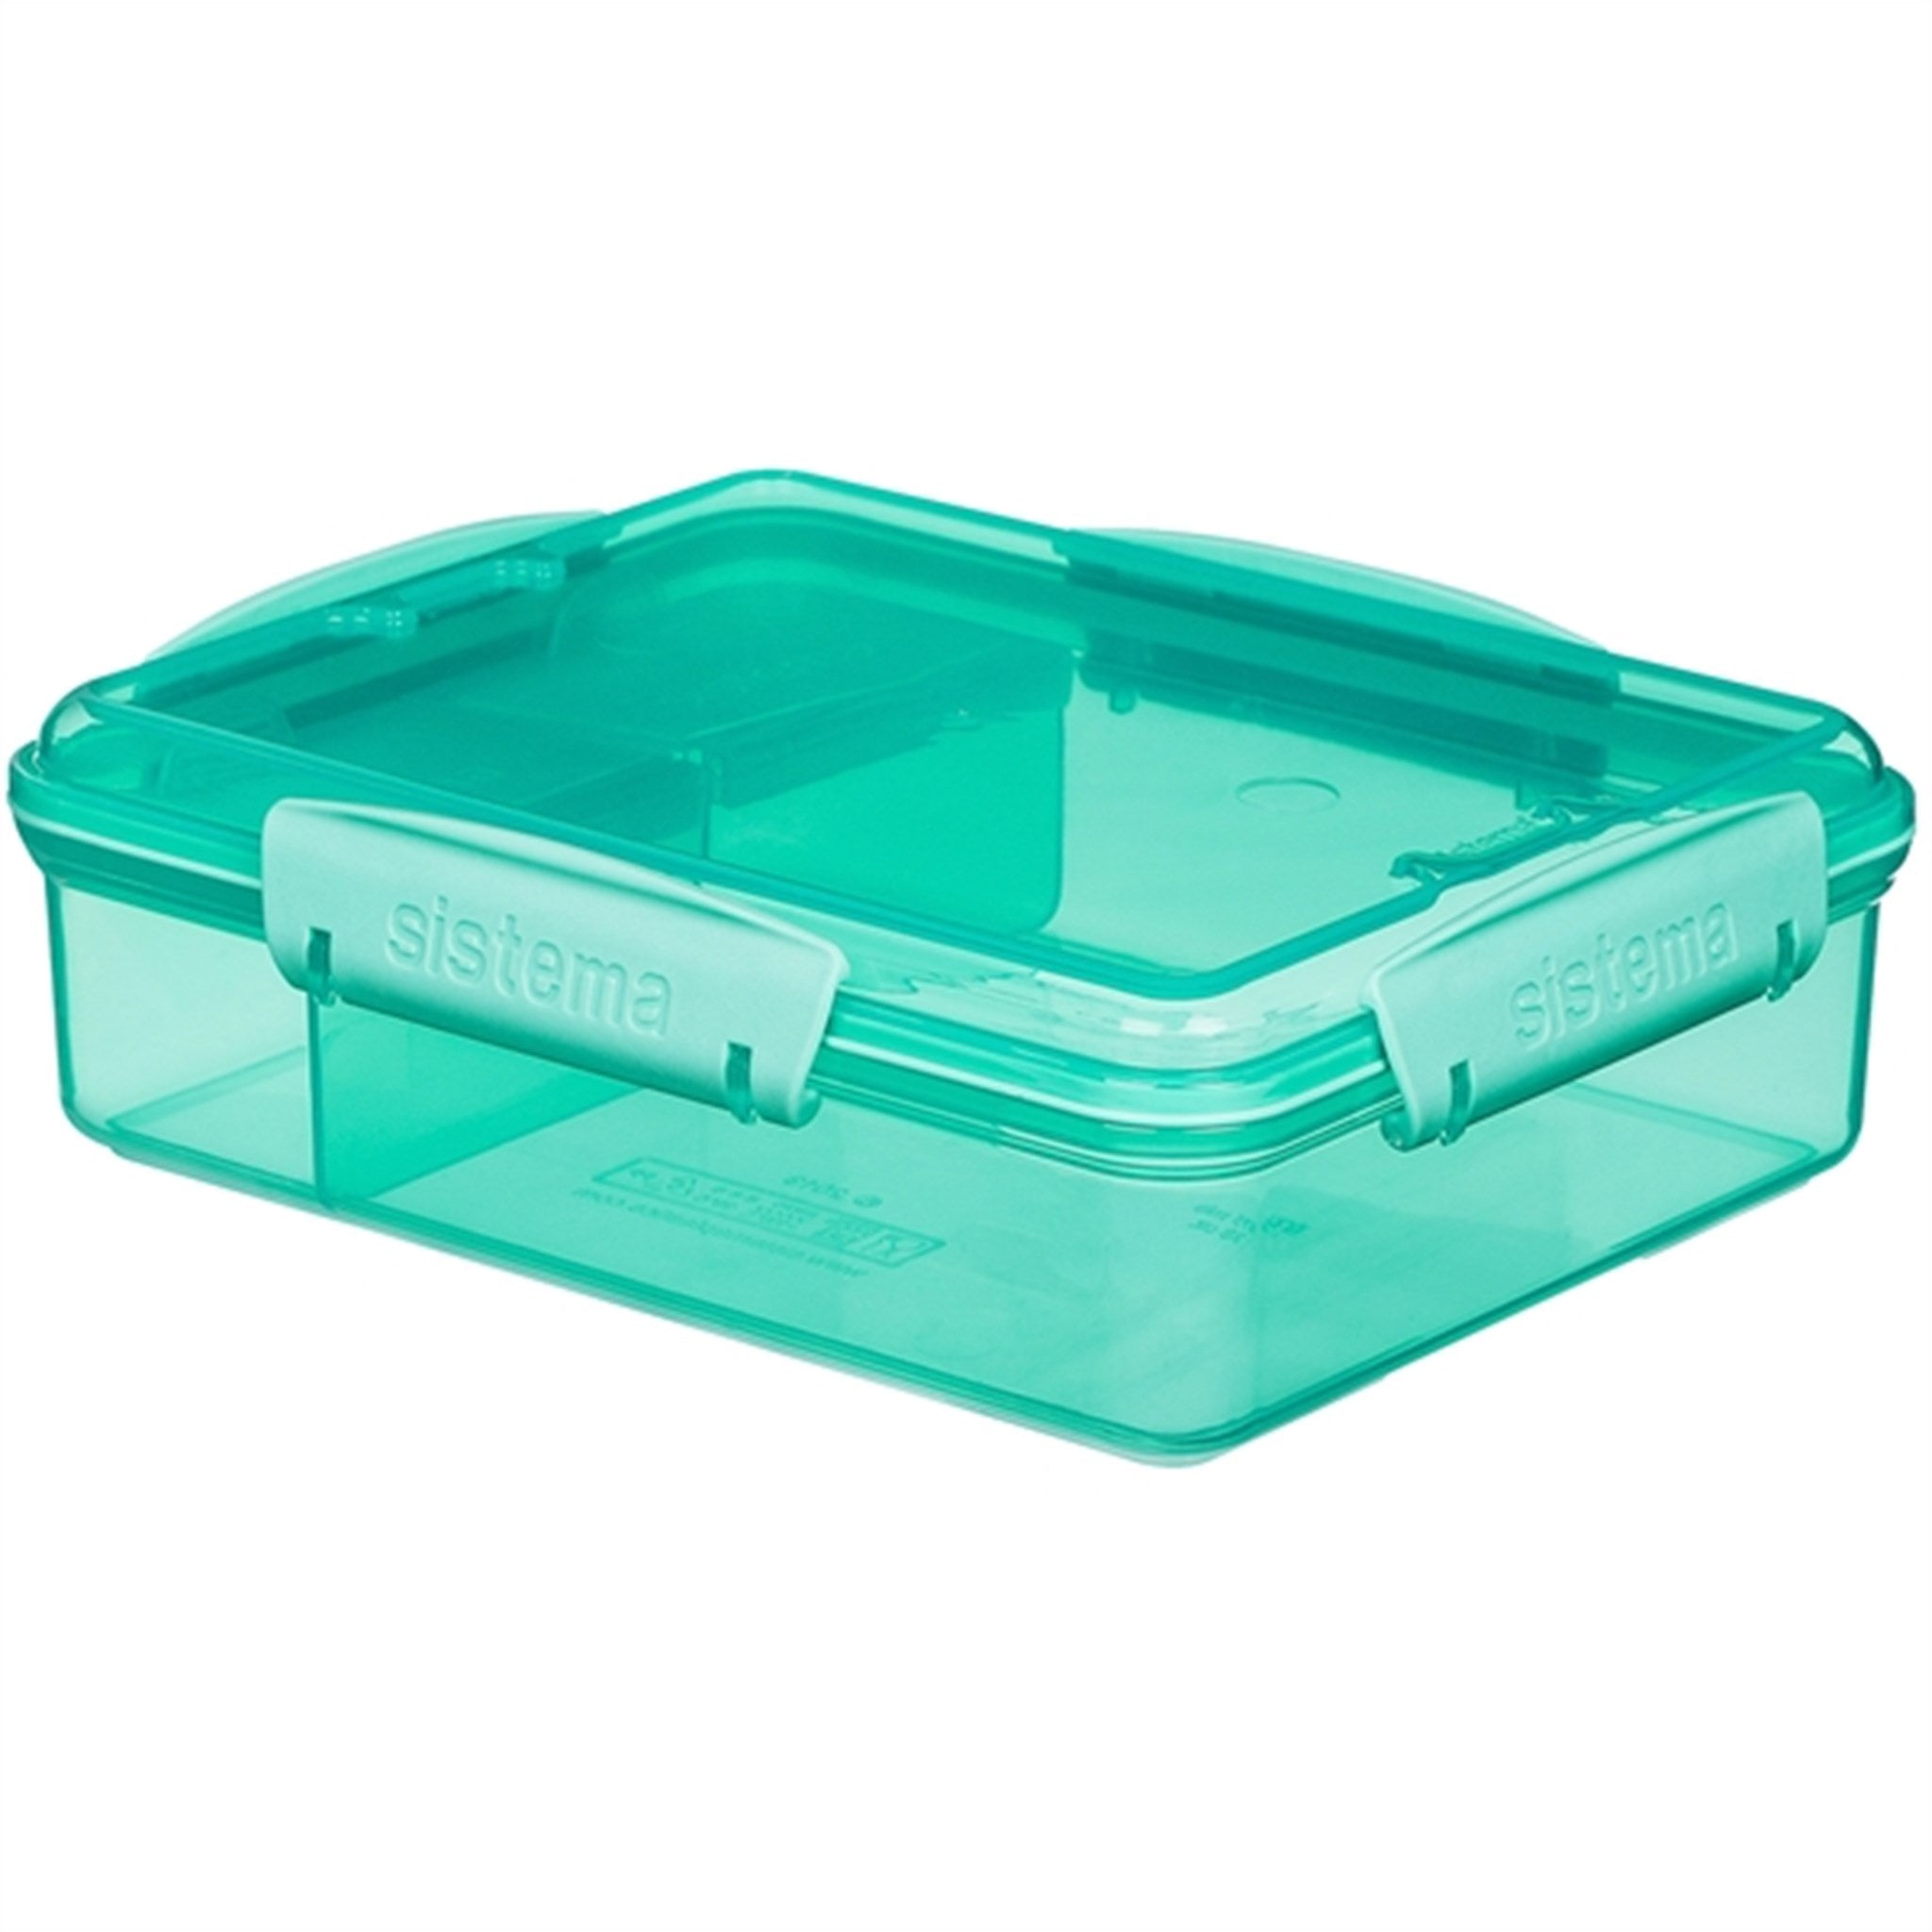 Sistema Snack Attack Duo Lunchlåda 975 ml Teal